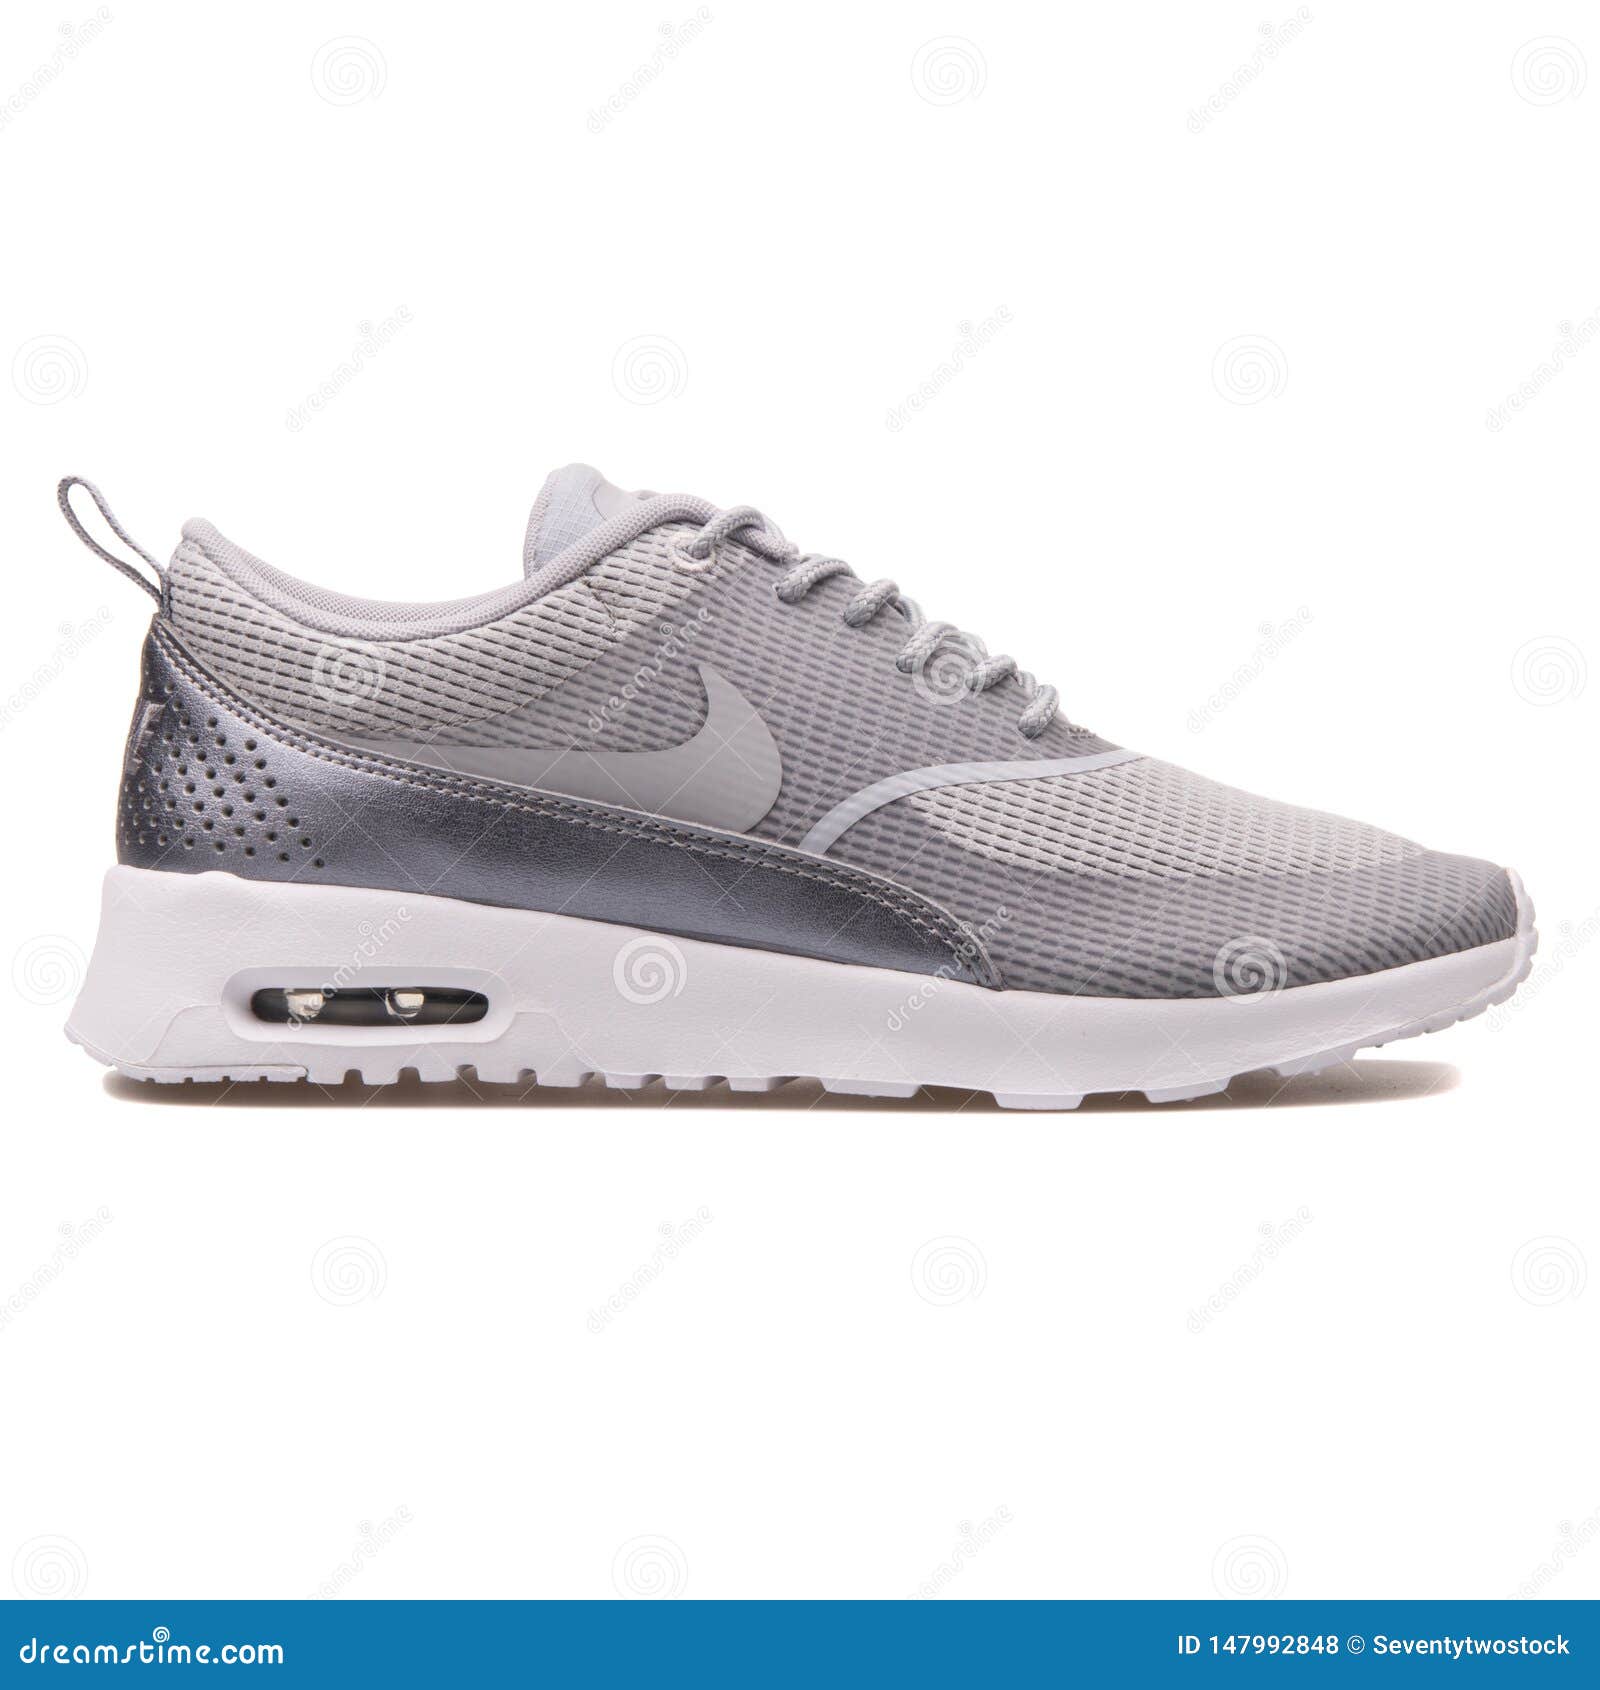 Formulering gewoontjes Diversiteit Nike Air Max Thea TXT Metallic Grey Sneaker Editorial Stock Photo - Image  of background, colour: 147992848